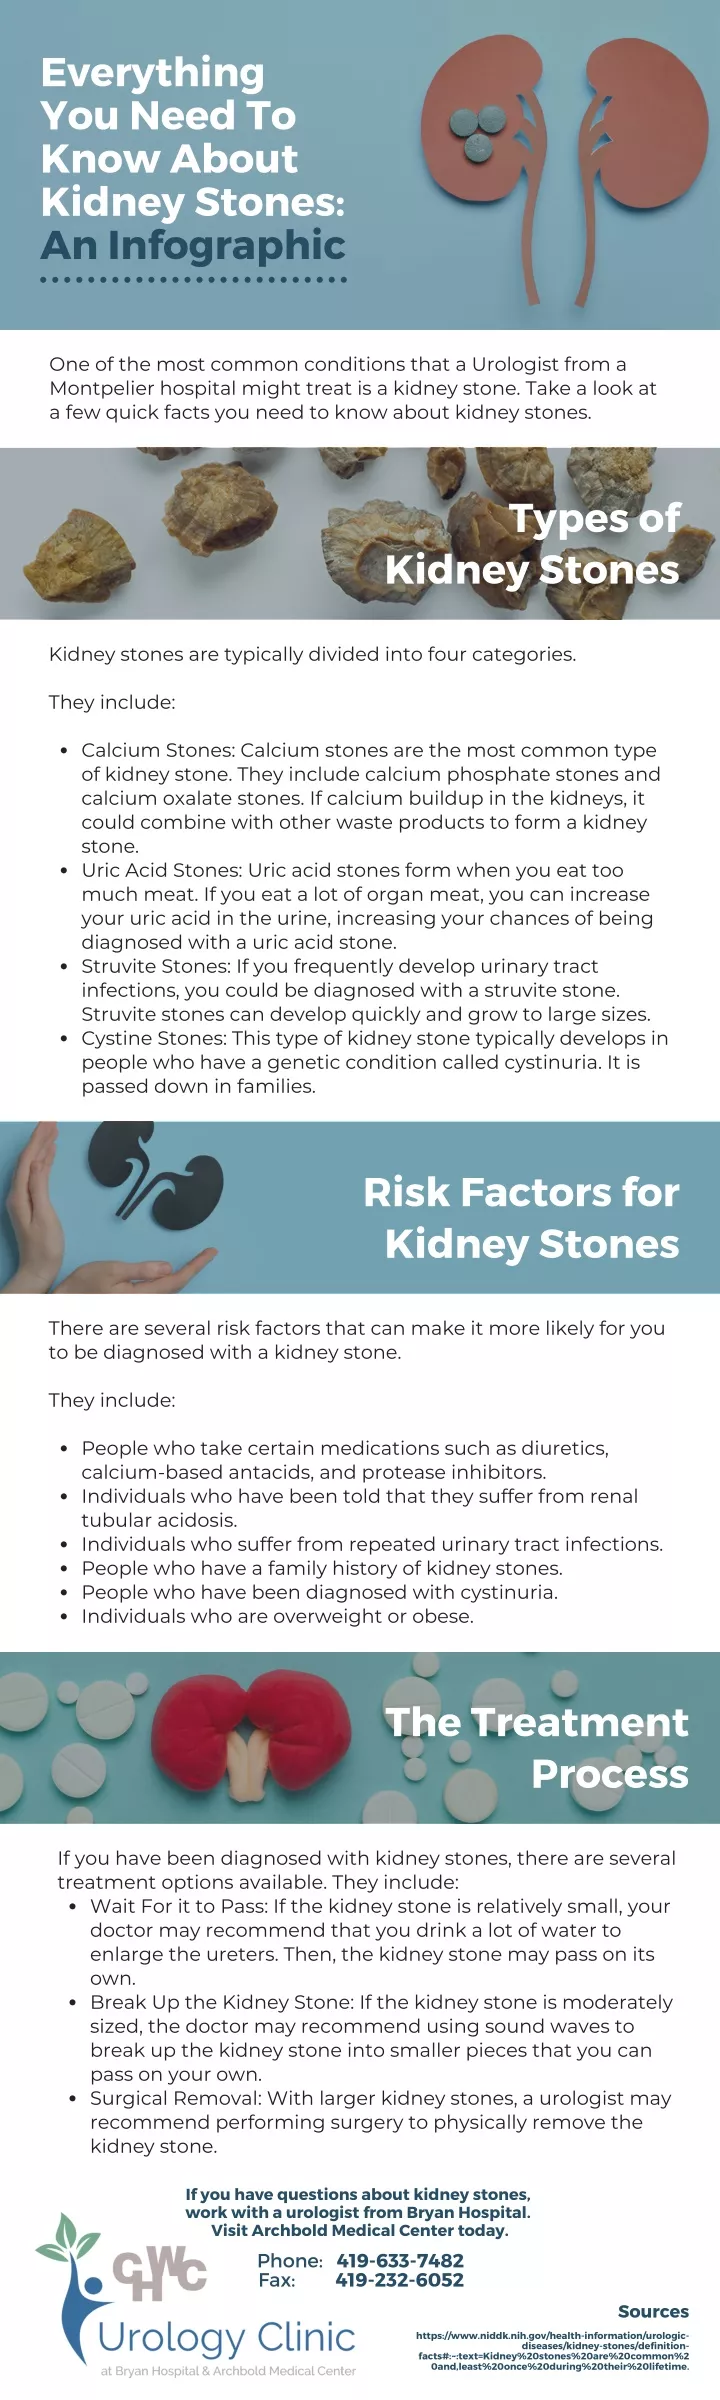 everything you need to know about kidney stones